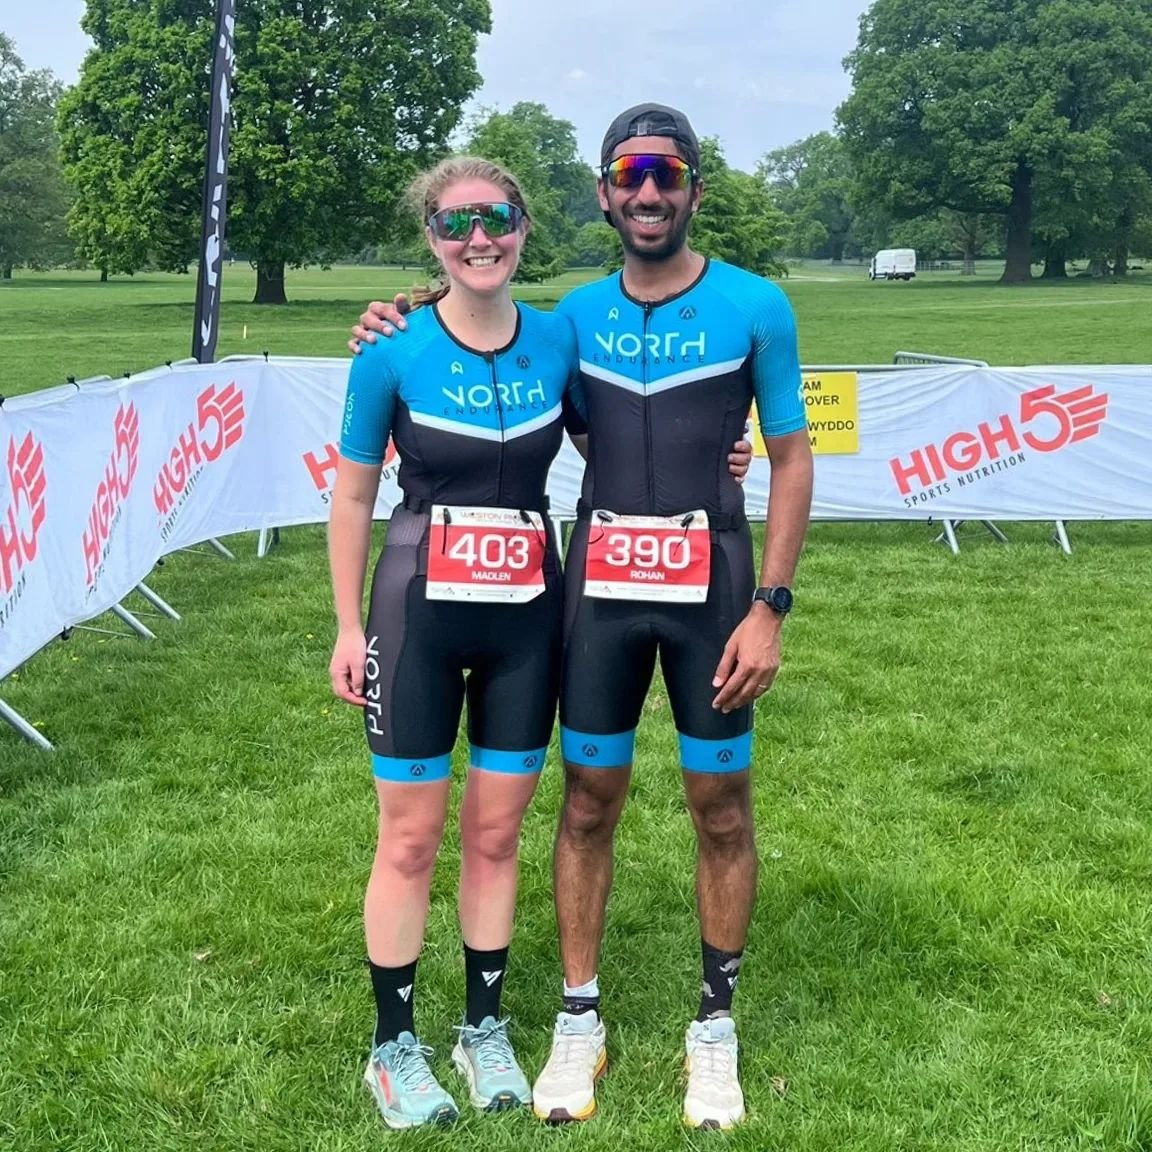 Battle on! 🥊

It was man vs. mountain and Husband vs Wife last weekend!

Ultra Trail Snowdonia ⛰️
Coached athlete Dominic Drew completed UTS 50km on the hottest day of the year, finishing 127th overall. 🙌

Just 2 weeks post London Marathon and with